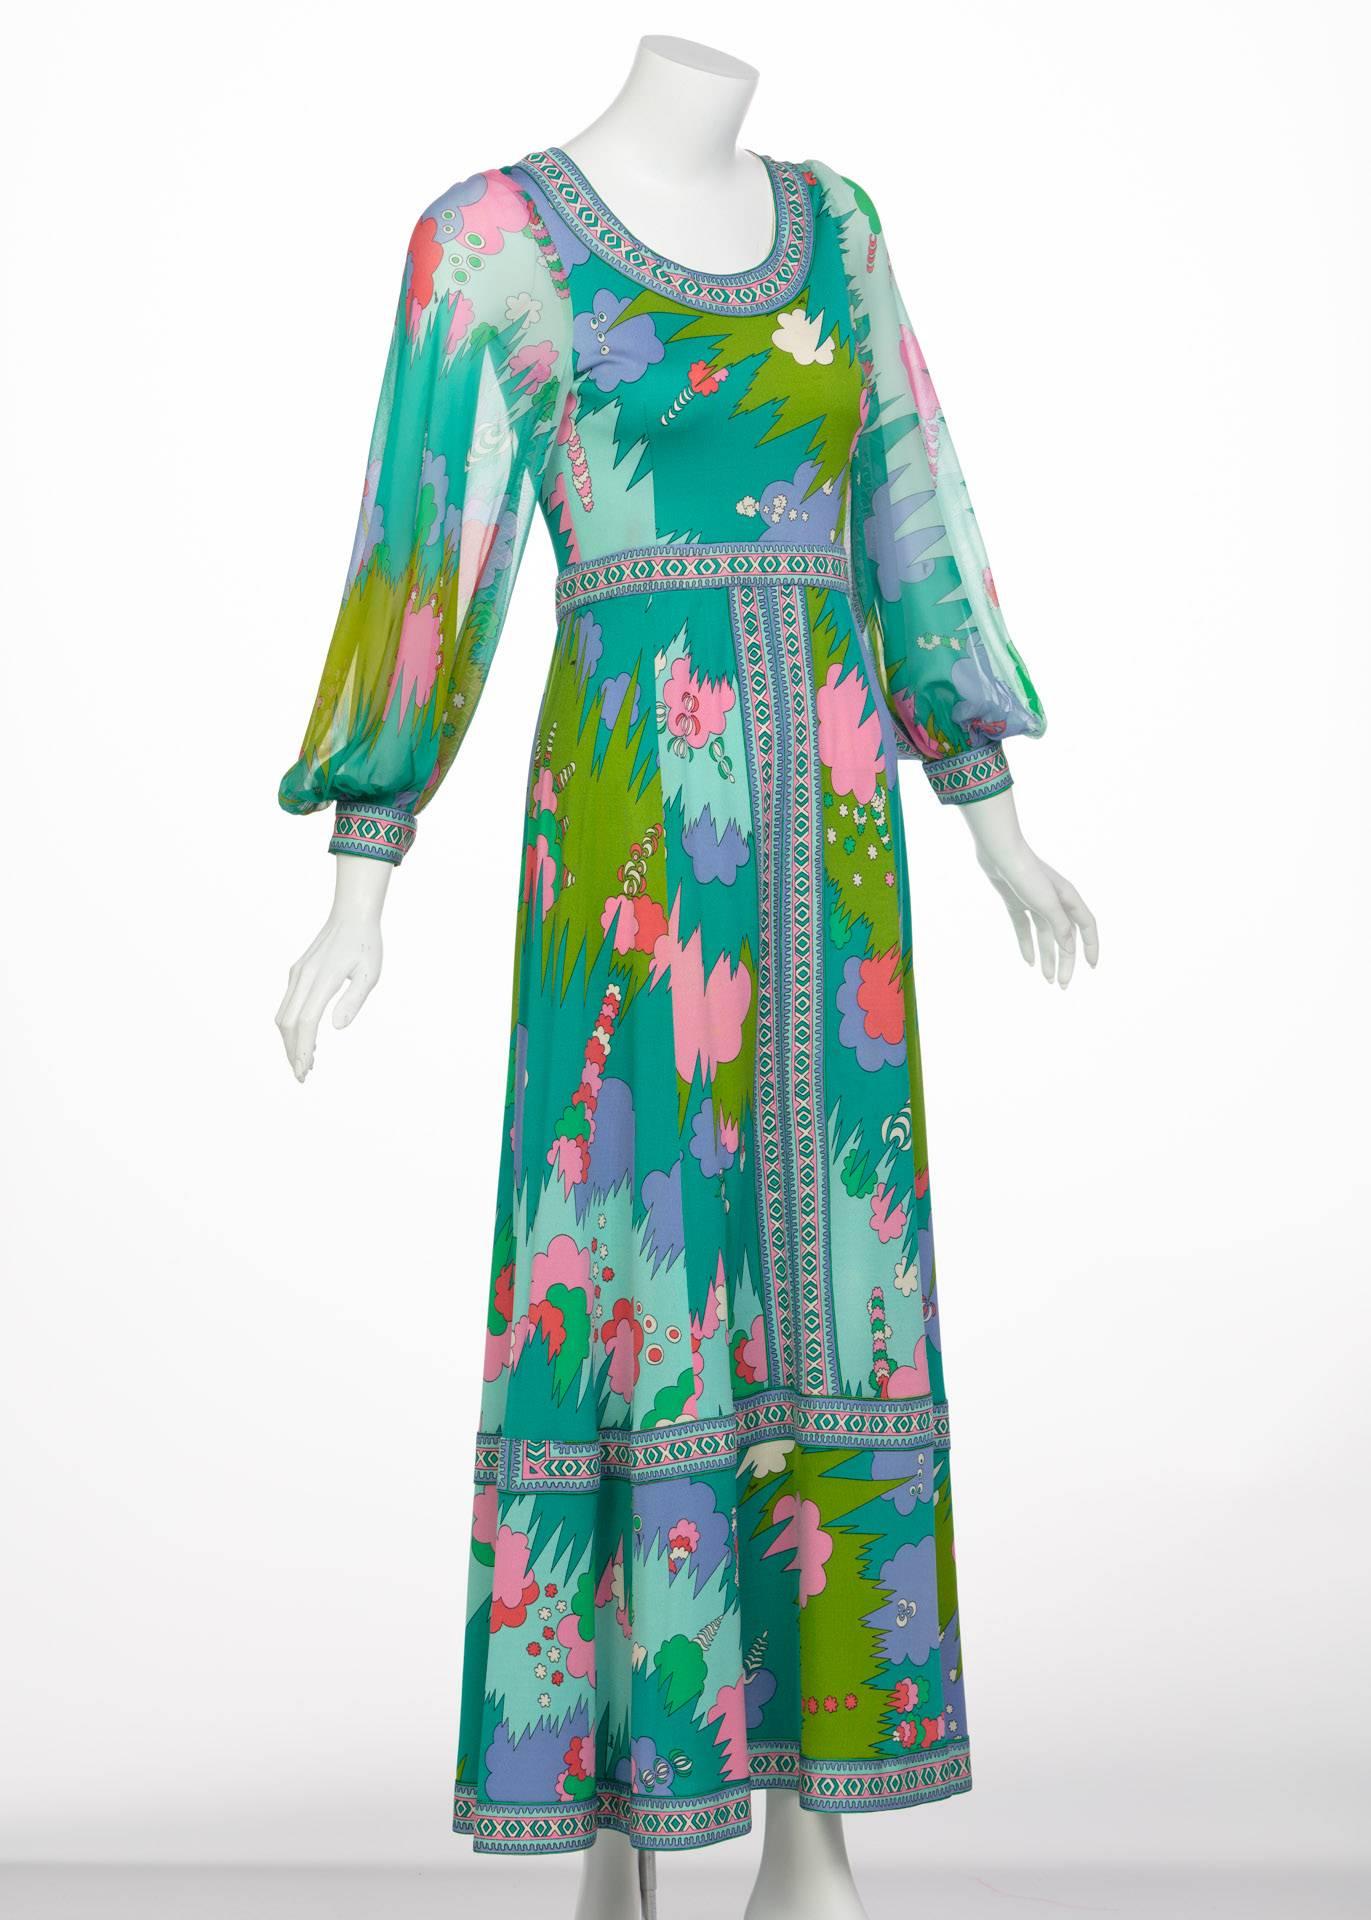 Blue Bessi Multicolored Silk Jersey Chiffon Sleeves Maxi dress, 1970s  For Sale